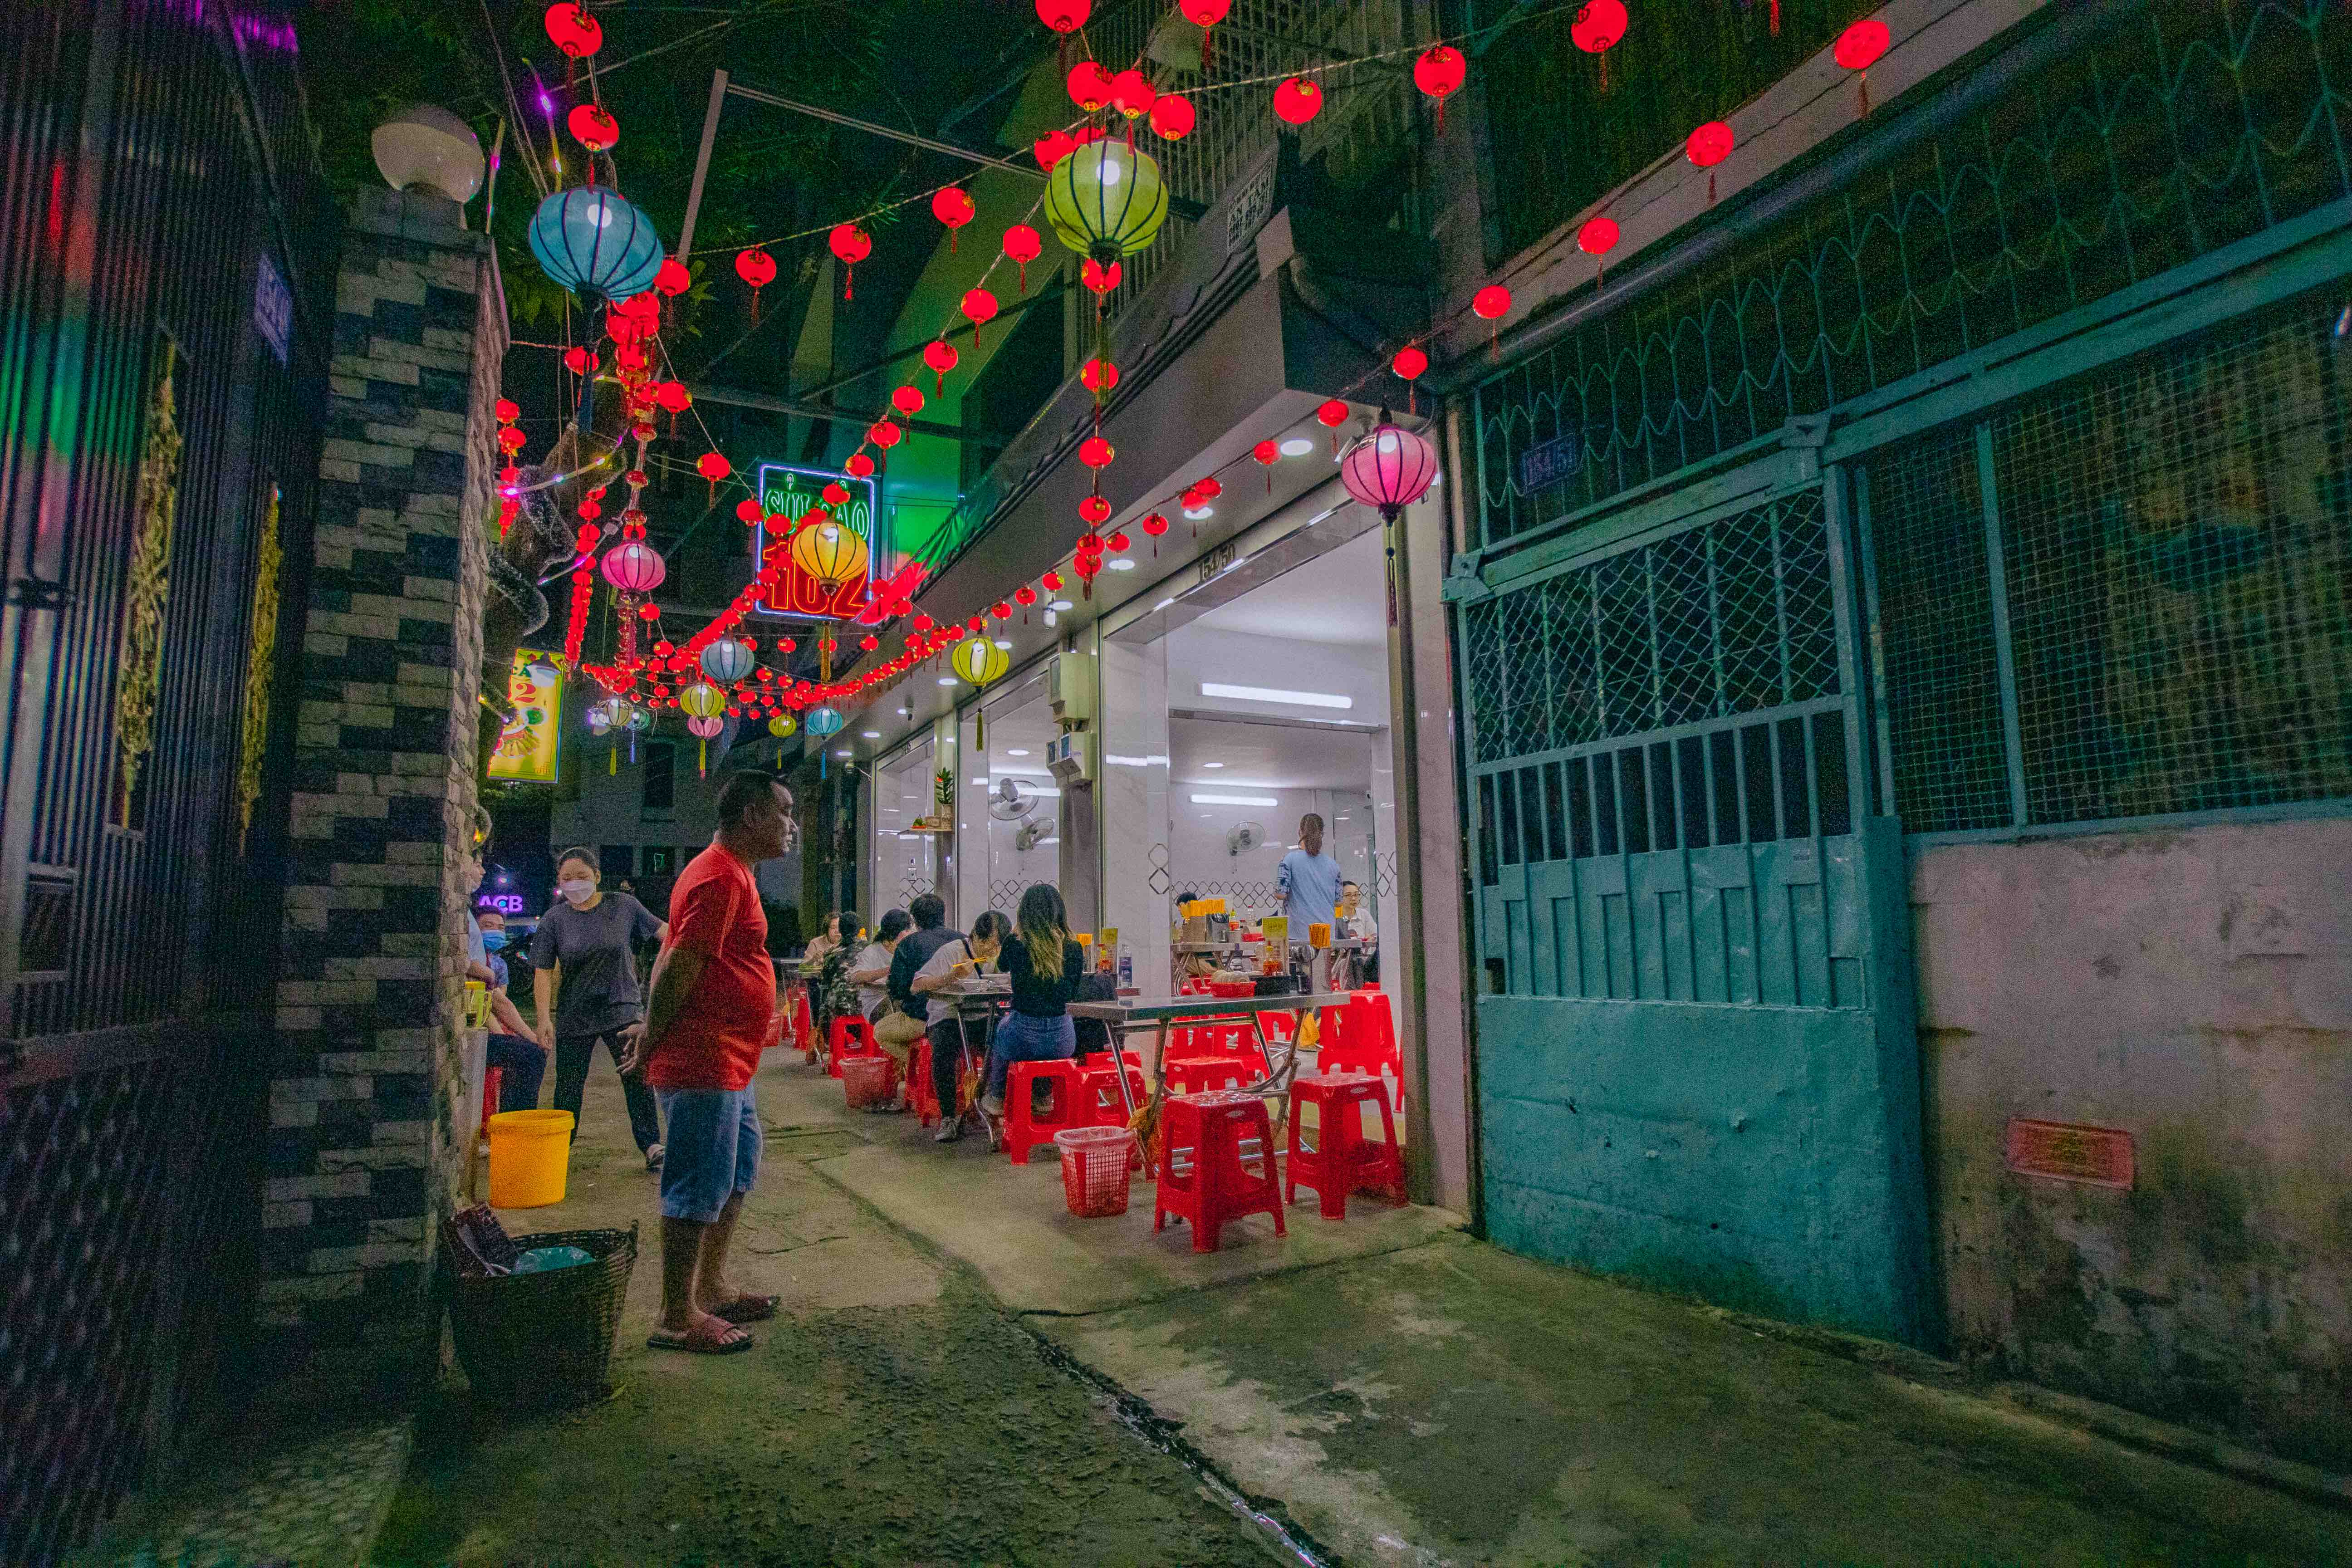 Customers enjoy shuijiao at a stall in an alley on Ha Ton Quyen Street, District 11, Ho Chi Minh City. Photo: Linh To / Tuoi Tre News